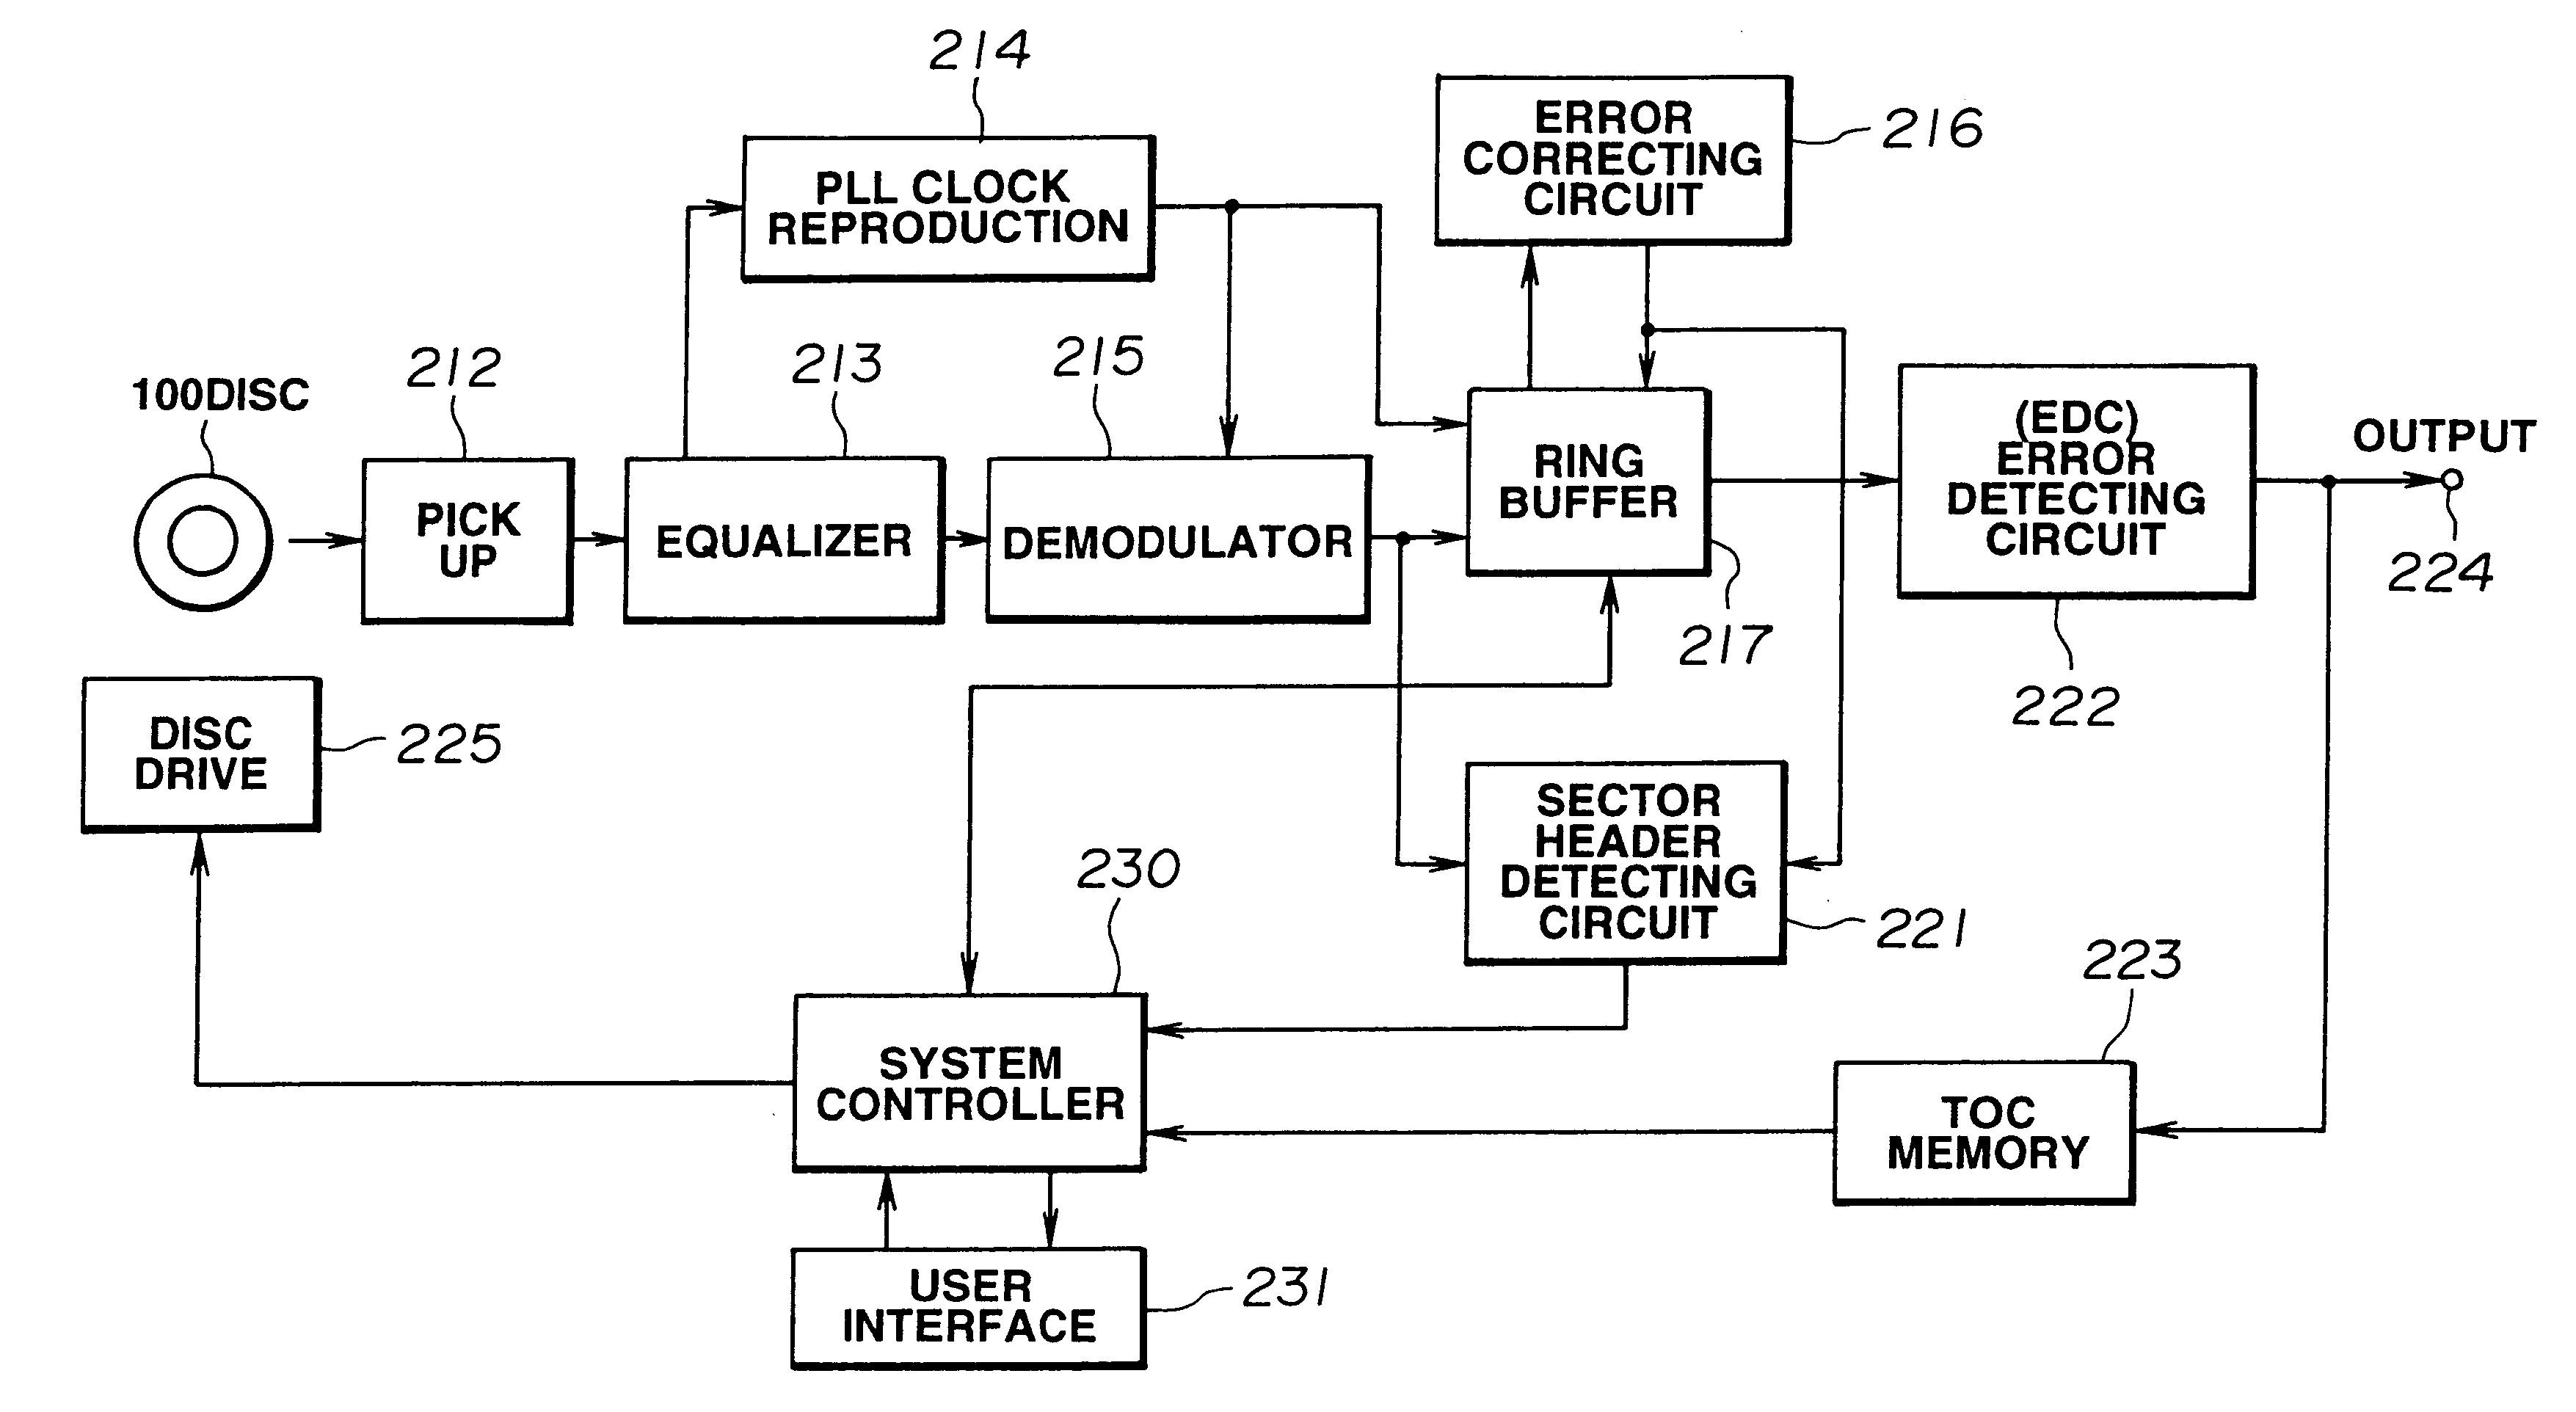 Method and apparatus for recovering TOC and user information from an optical disk and using the TOC information to access user tracks